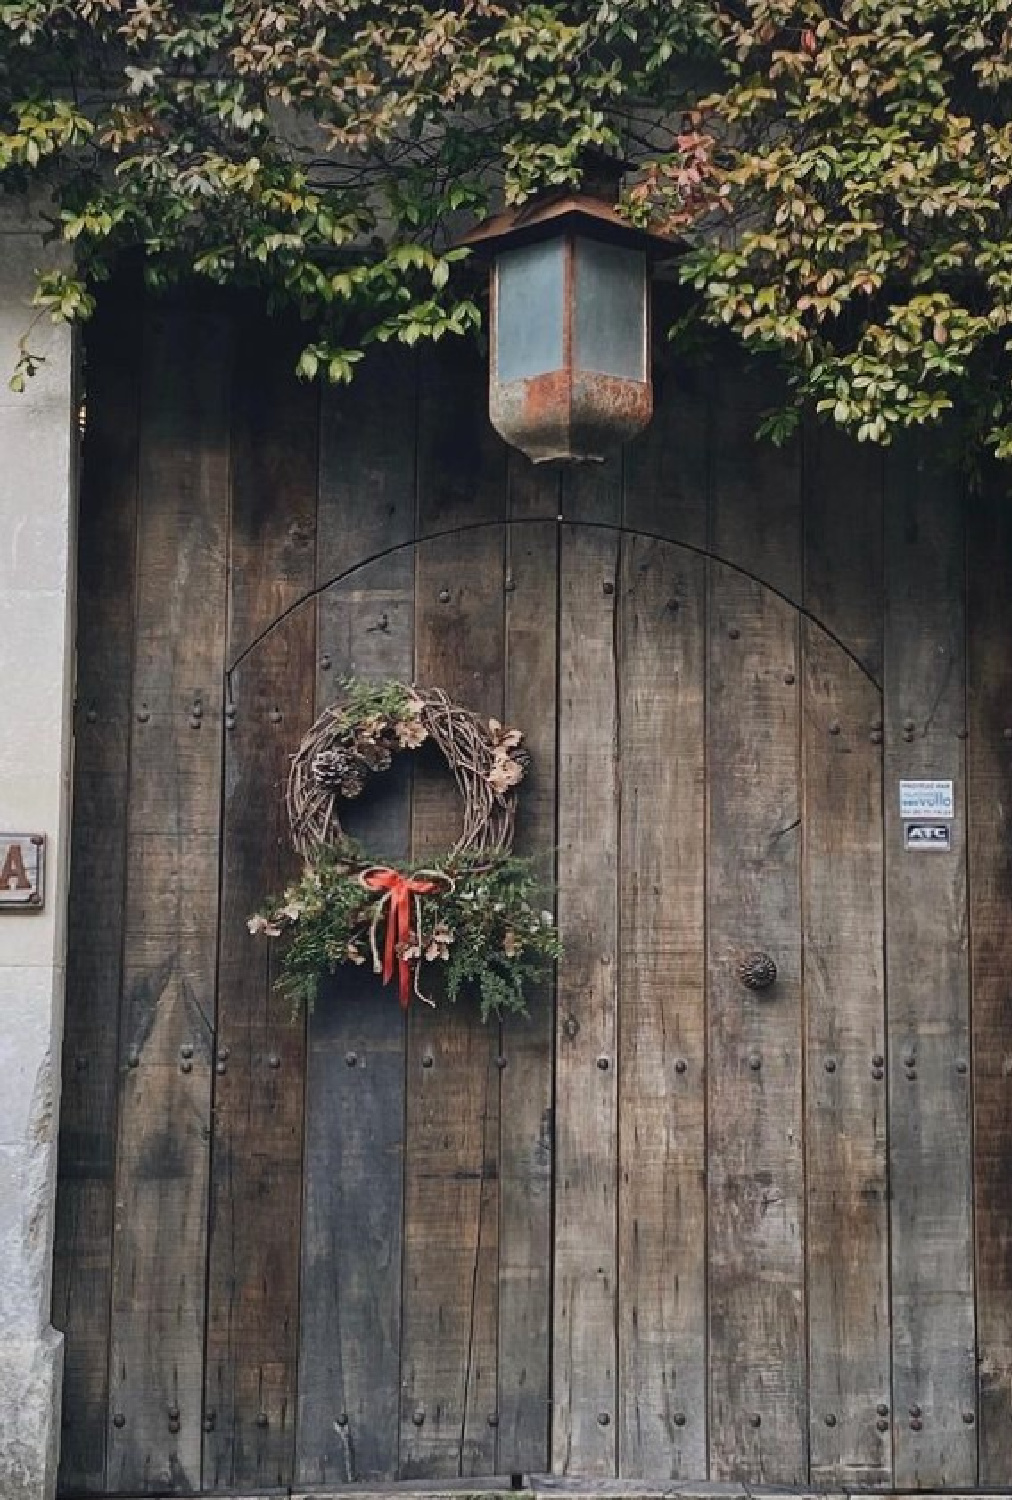 Lovely rustic Christmas wreath on a rugged wood door in Provence - @3_sources. #frenchchristmas #provencechristmas